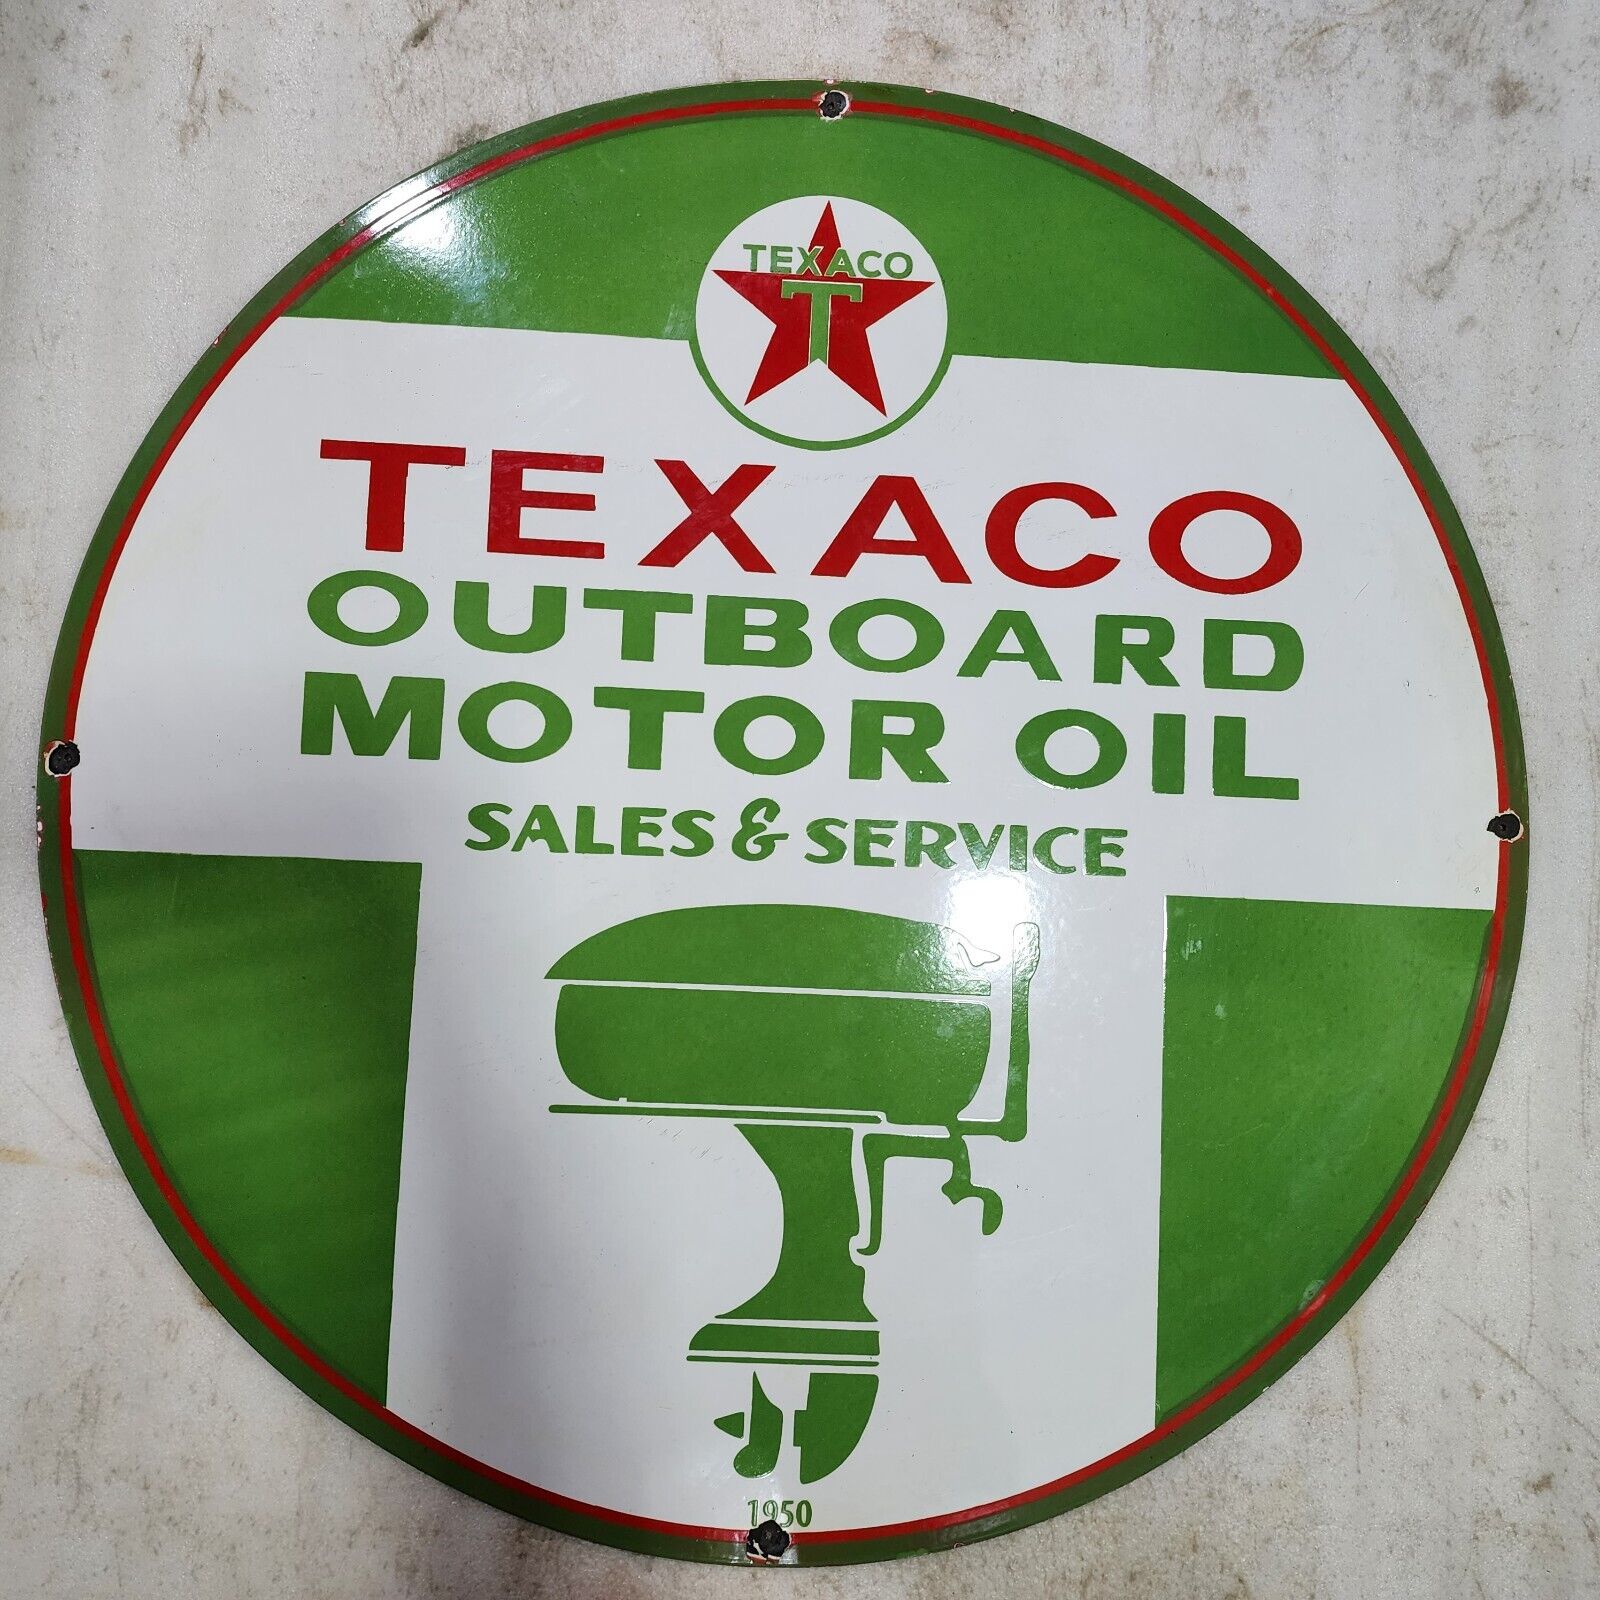 TEXACO OUTBOARD MOTOR OIL 45 INCHES ROUND ENAMEL SIGN